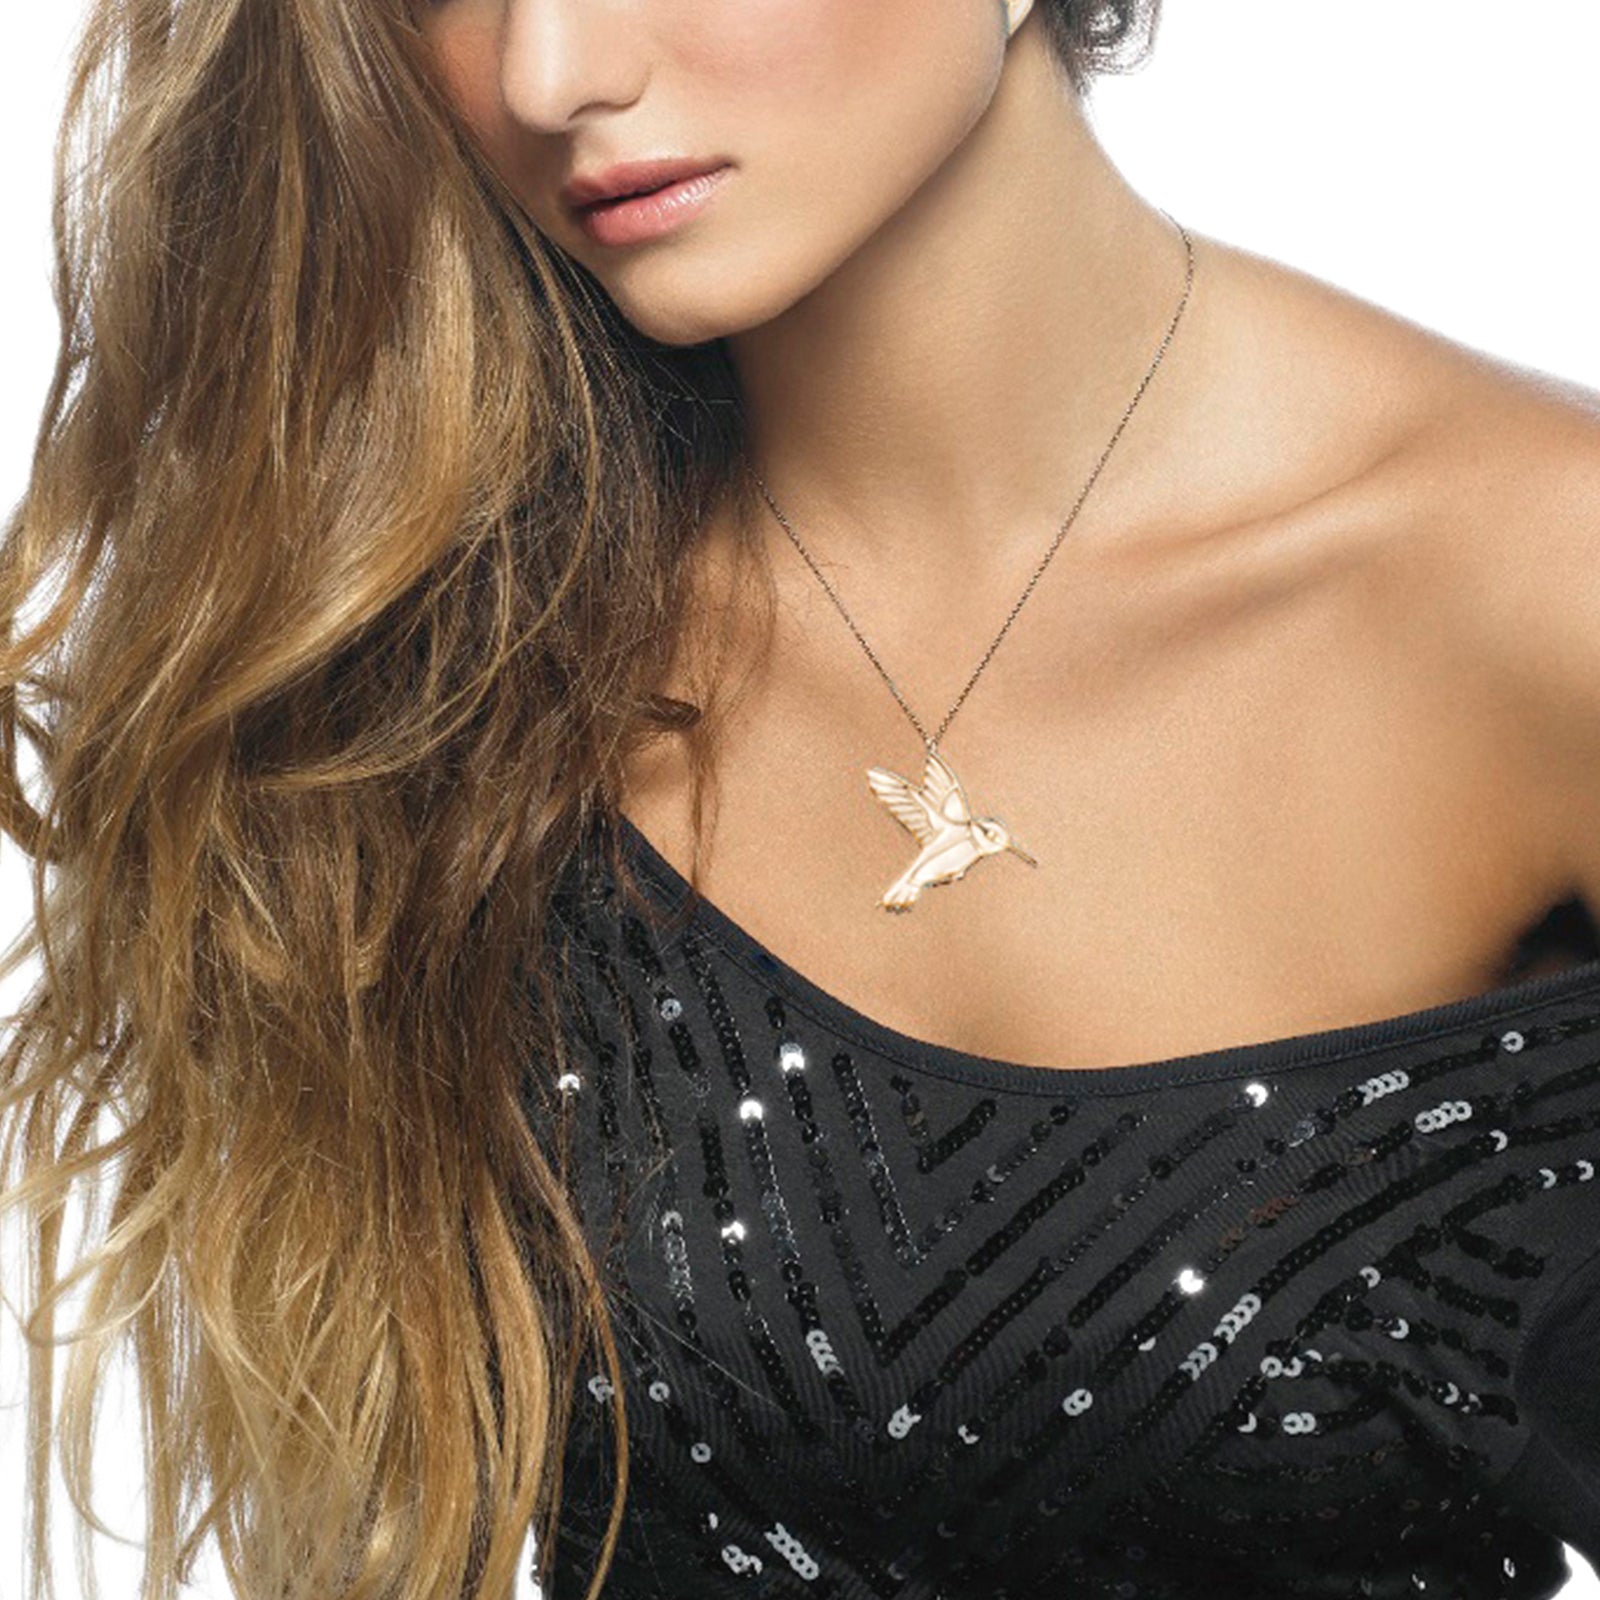 A woman wearing a sequined black top and a Gold Plated Sterling Silver Hummingbird Necklace Pendant, showing her shoulder and long, wavy hair.